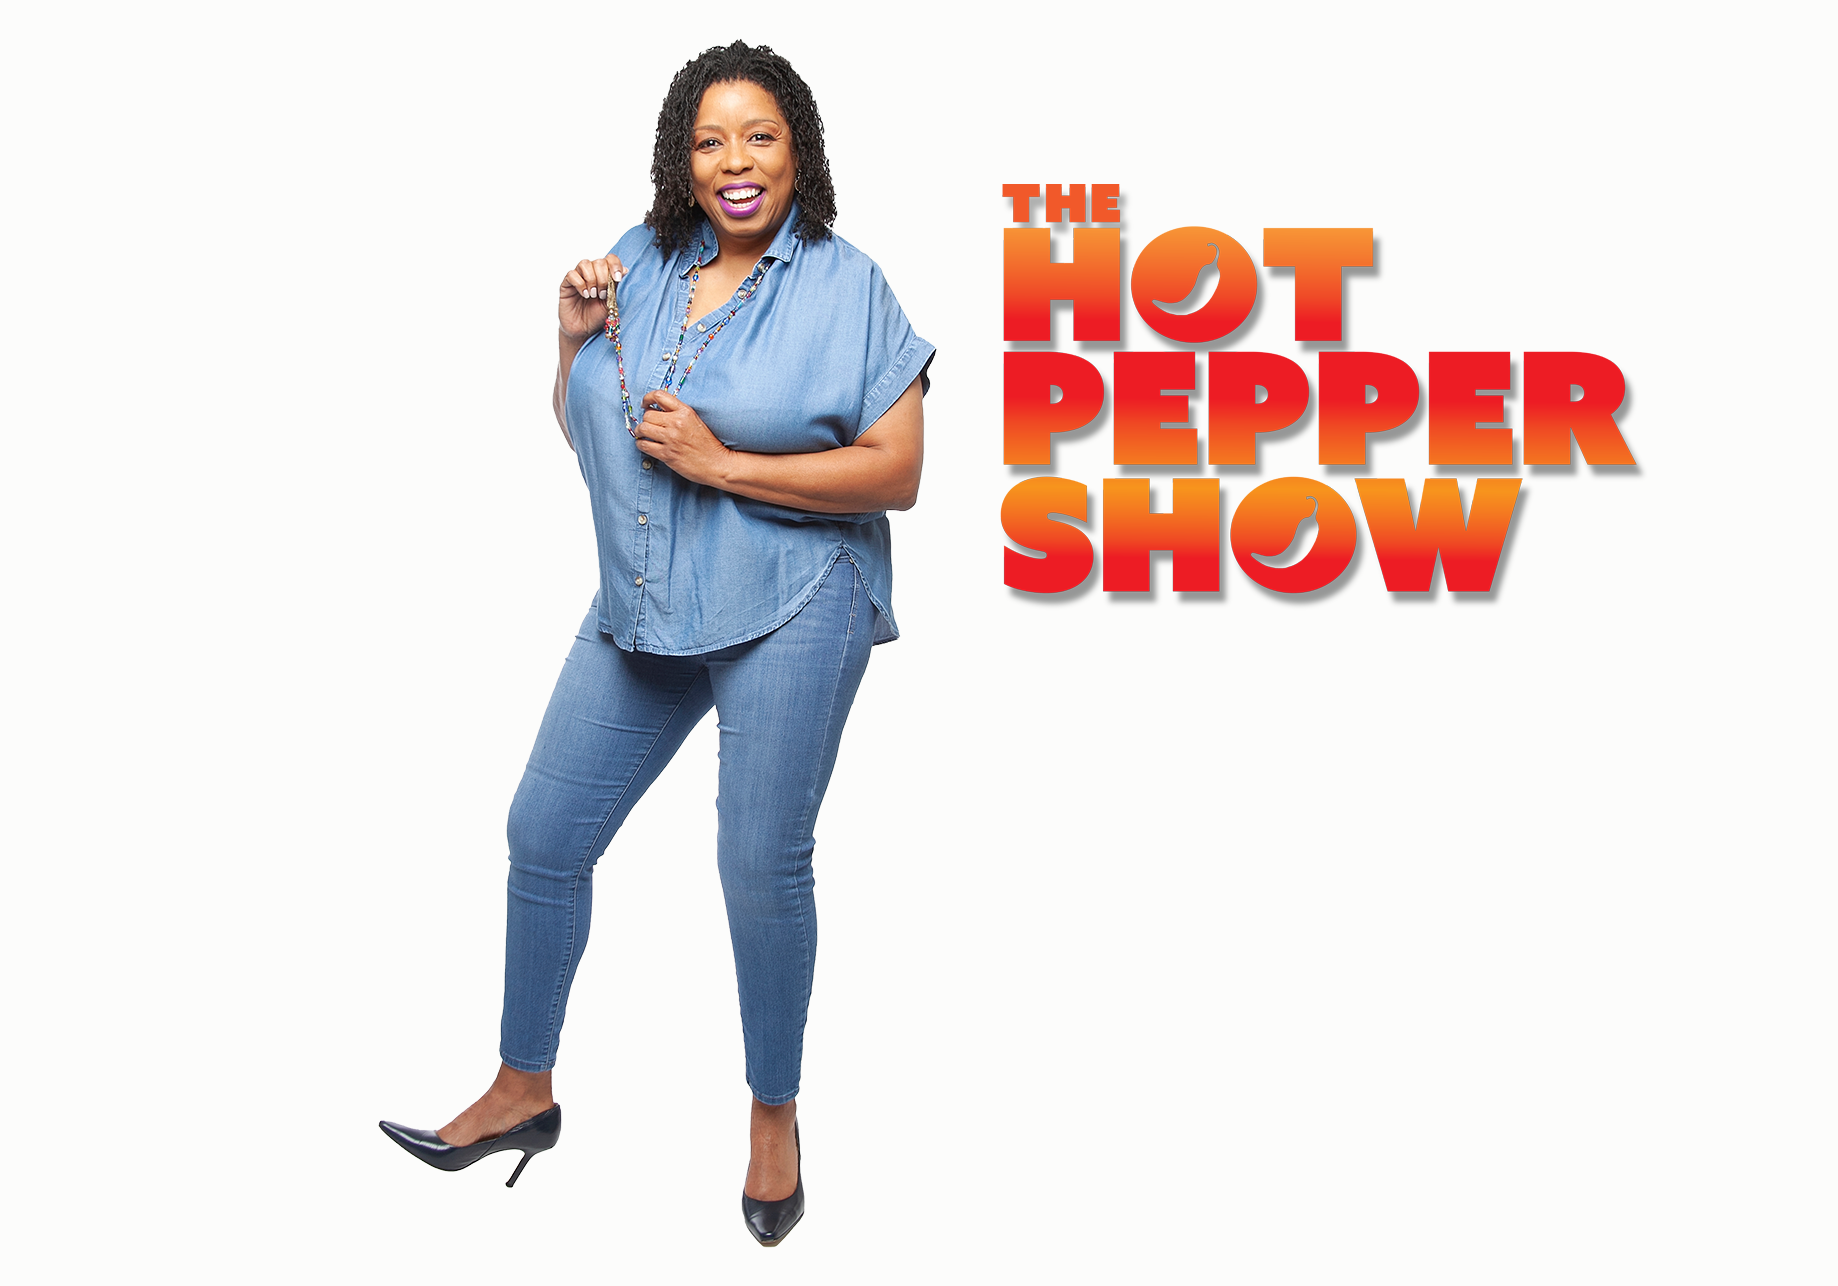 Hot Pepper Show with Pepper Thomas